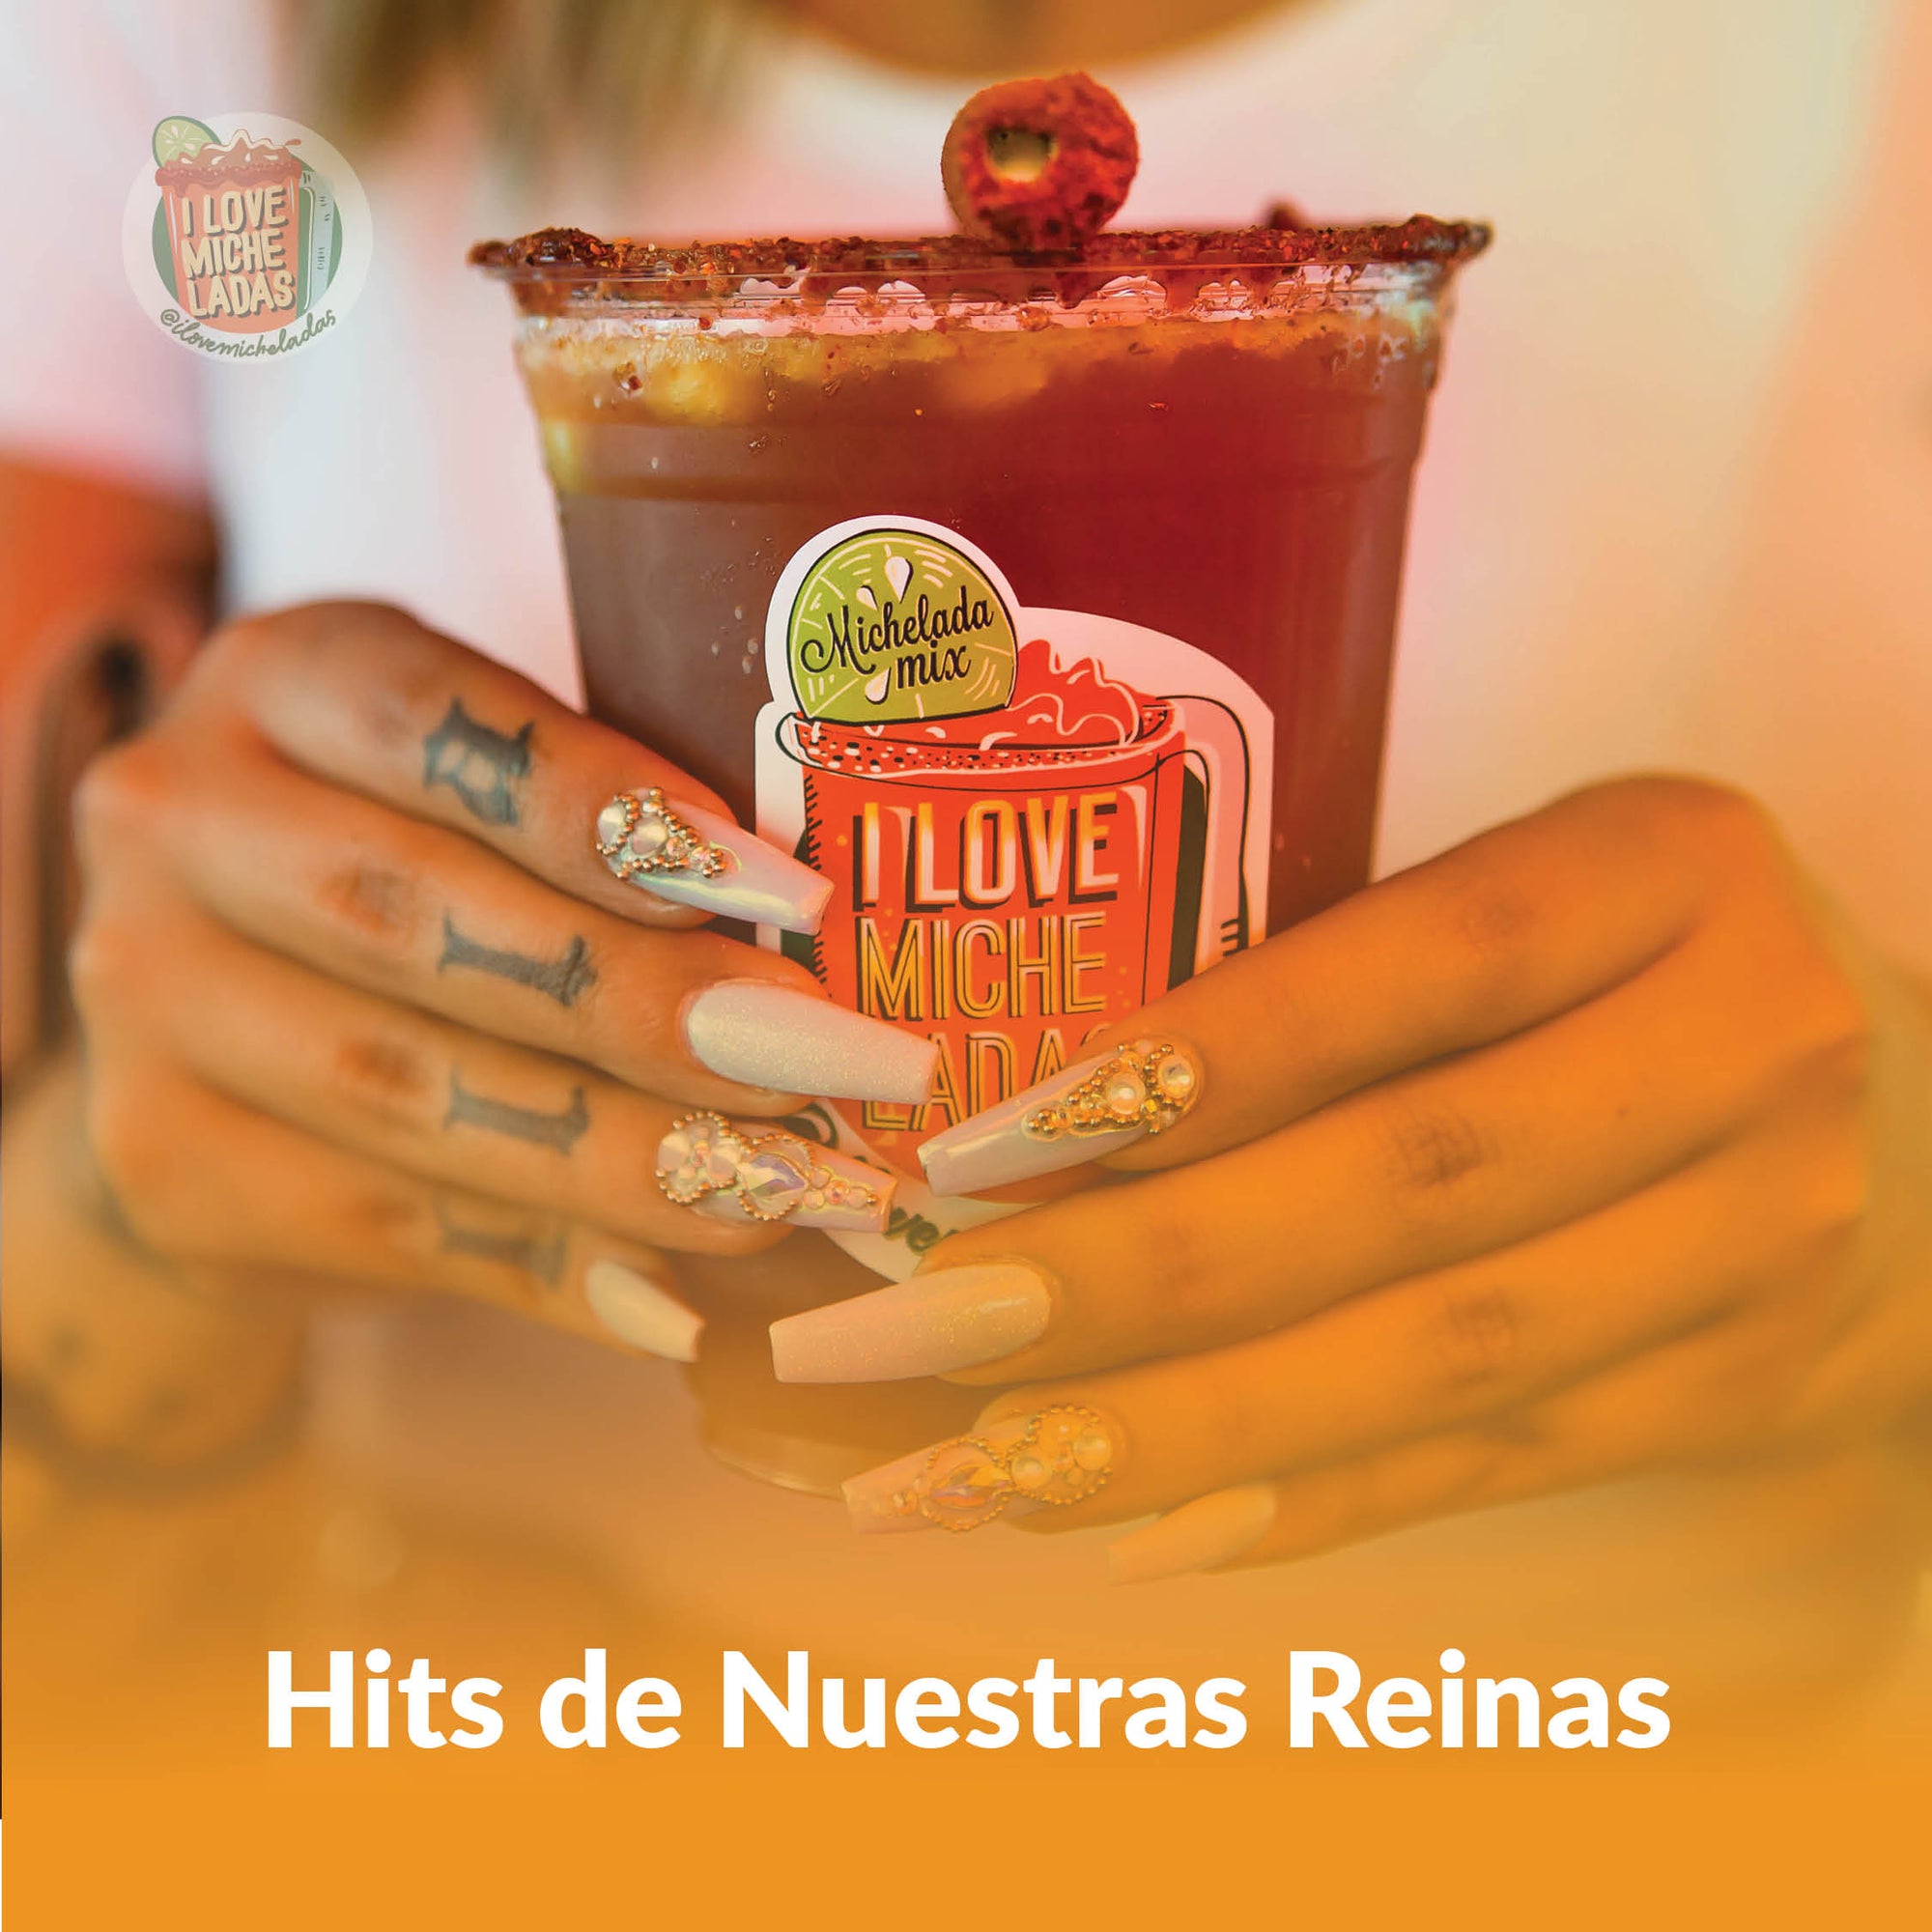 MICHE MIX OF THE WEEK: THE ONE WITH THE SPANISH HITS FROM NUESTRAS REINAS